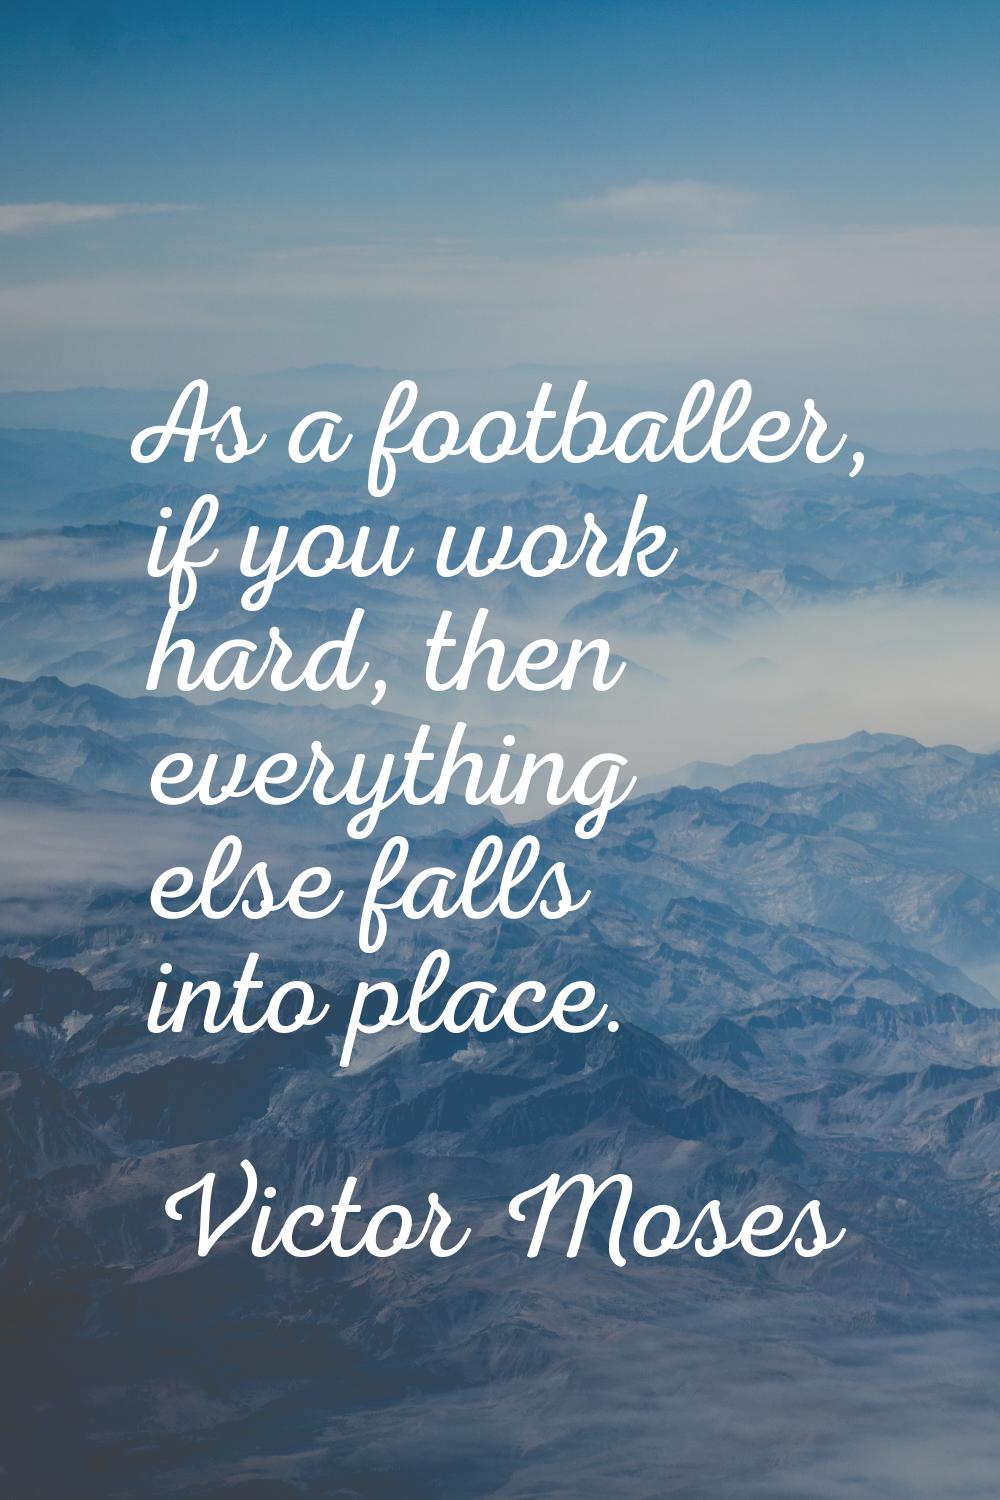 As a footballer, if you work hard, then everything else falls into place.